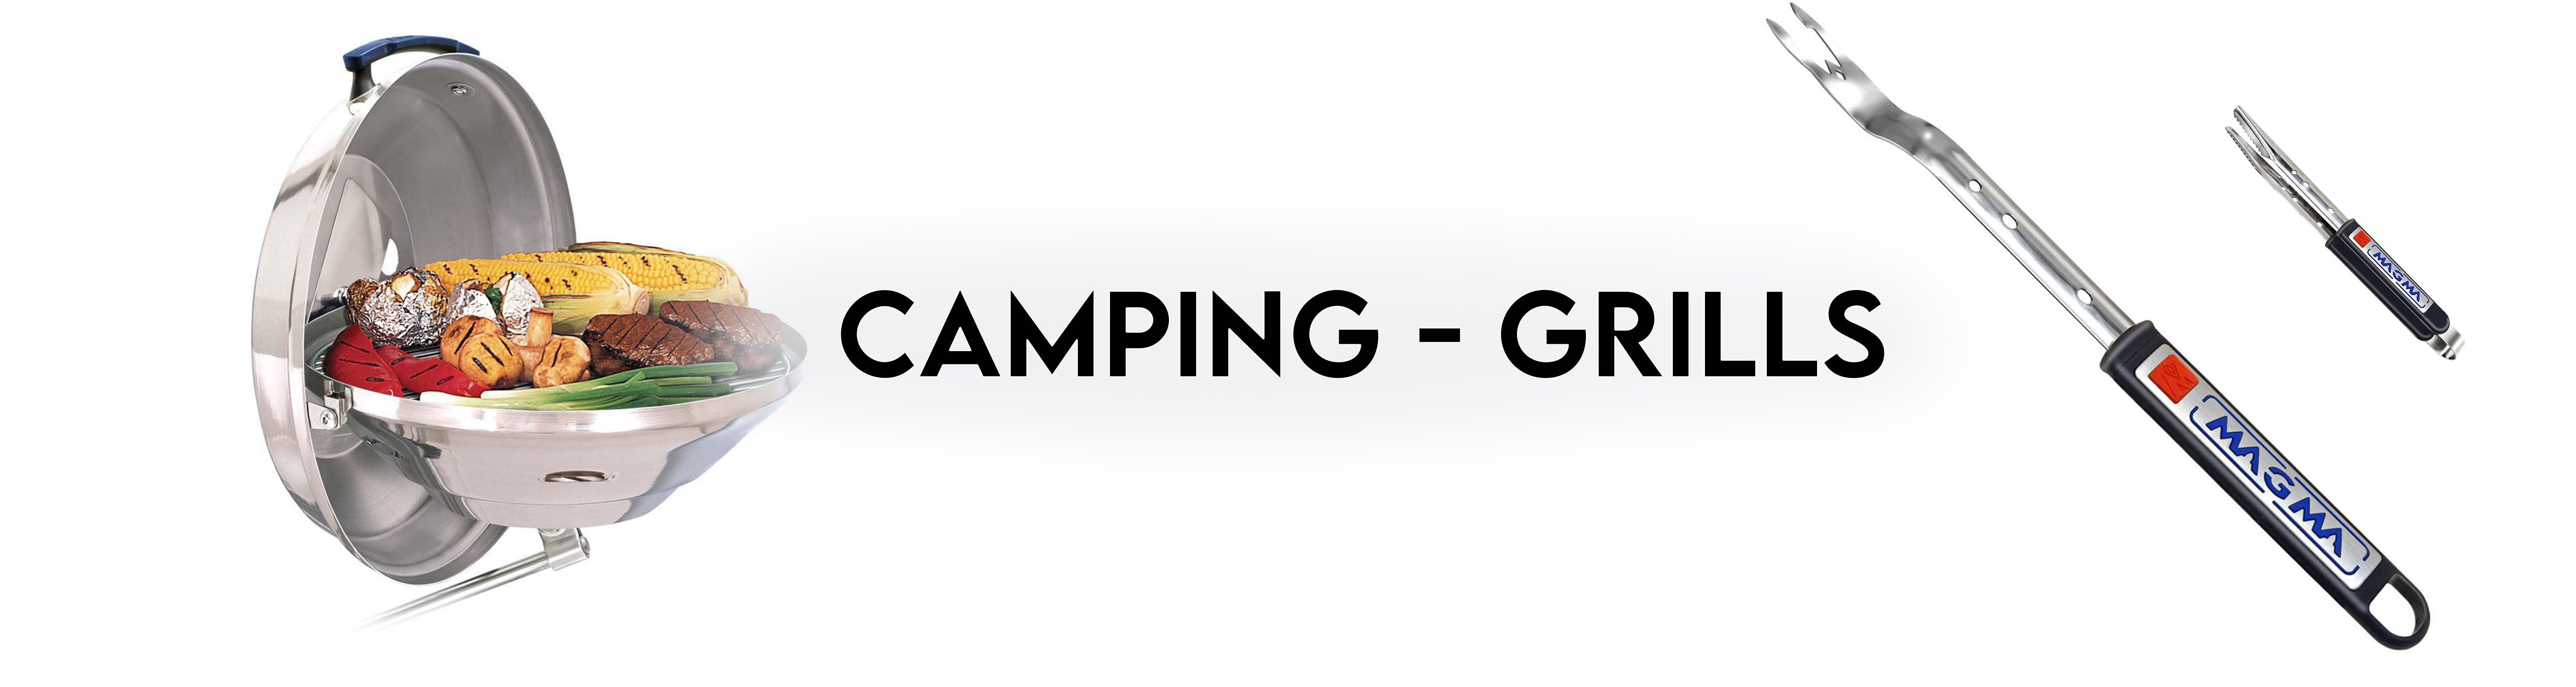 Camping - Grills - Recreation Outfitters